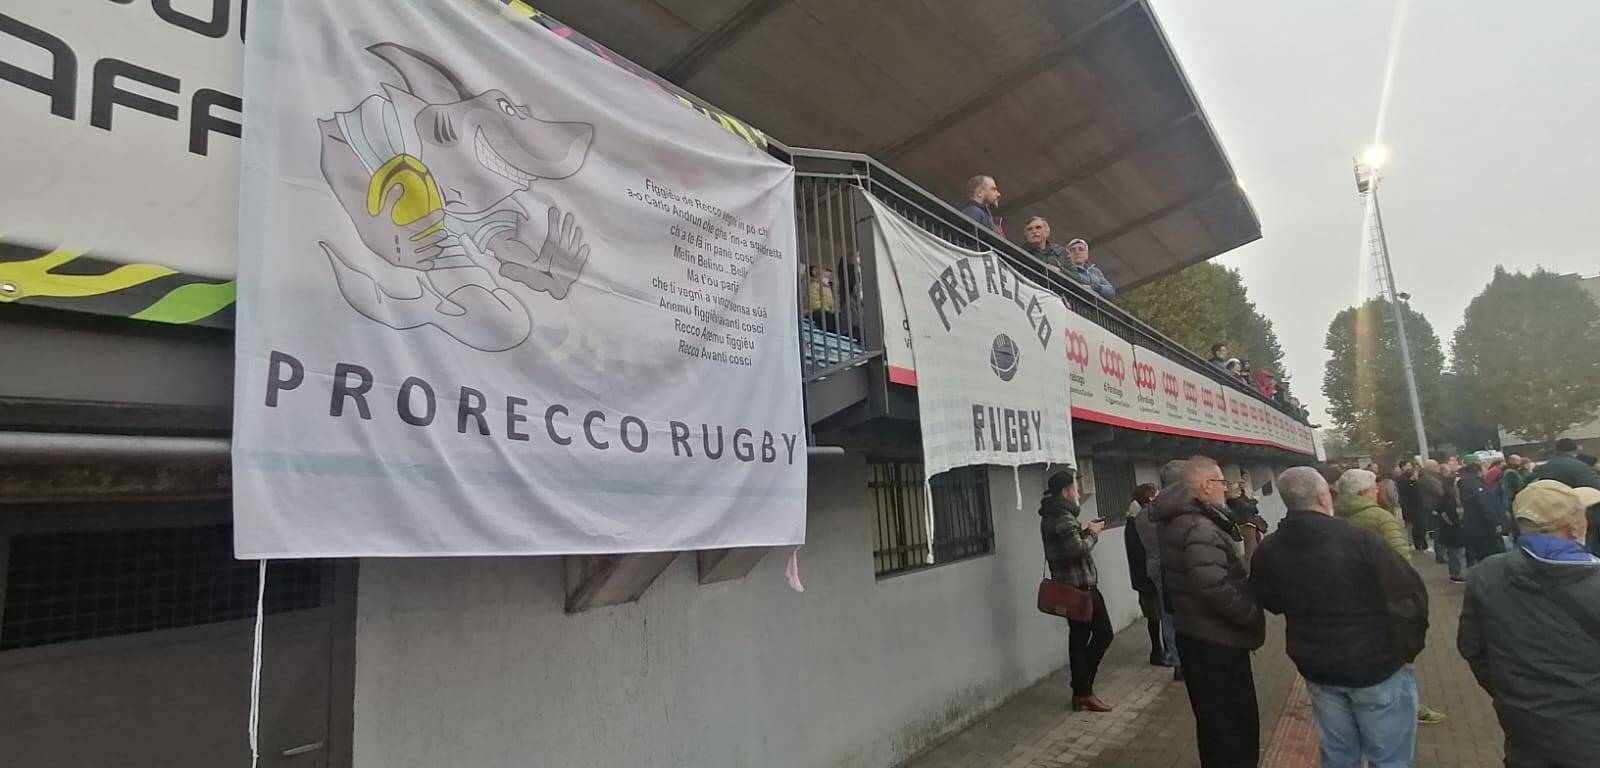 Pro Recco rugby